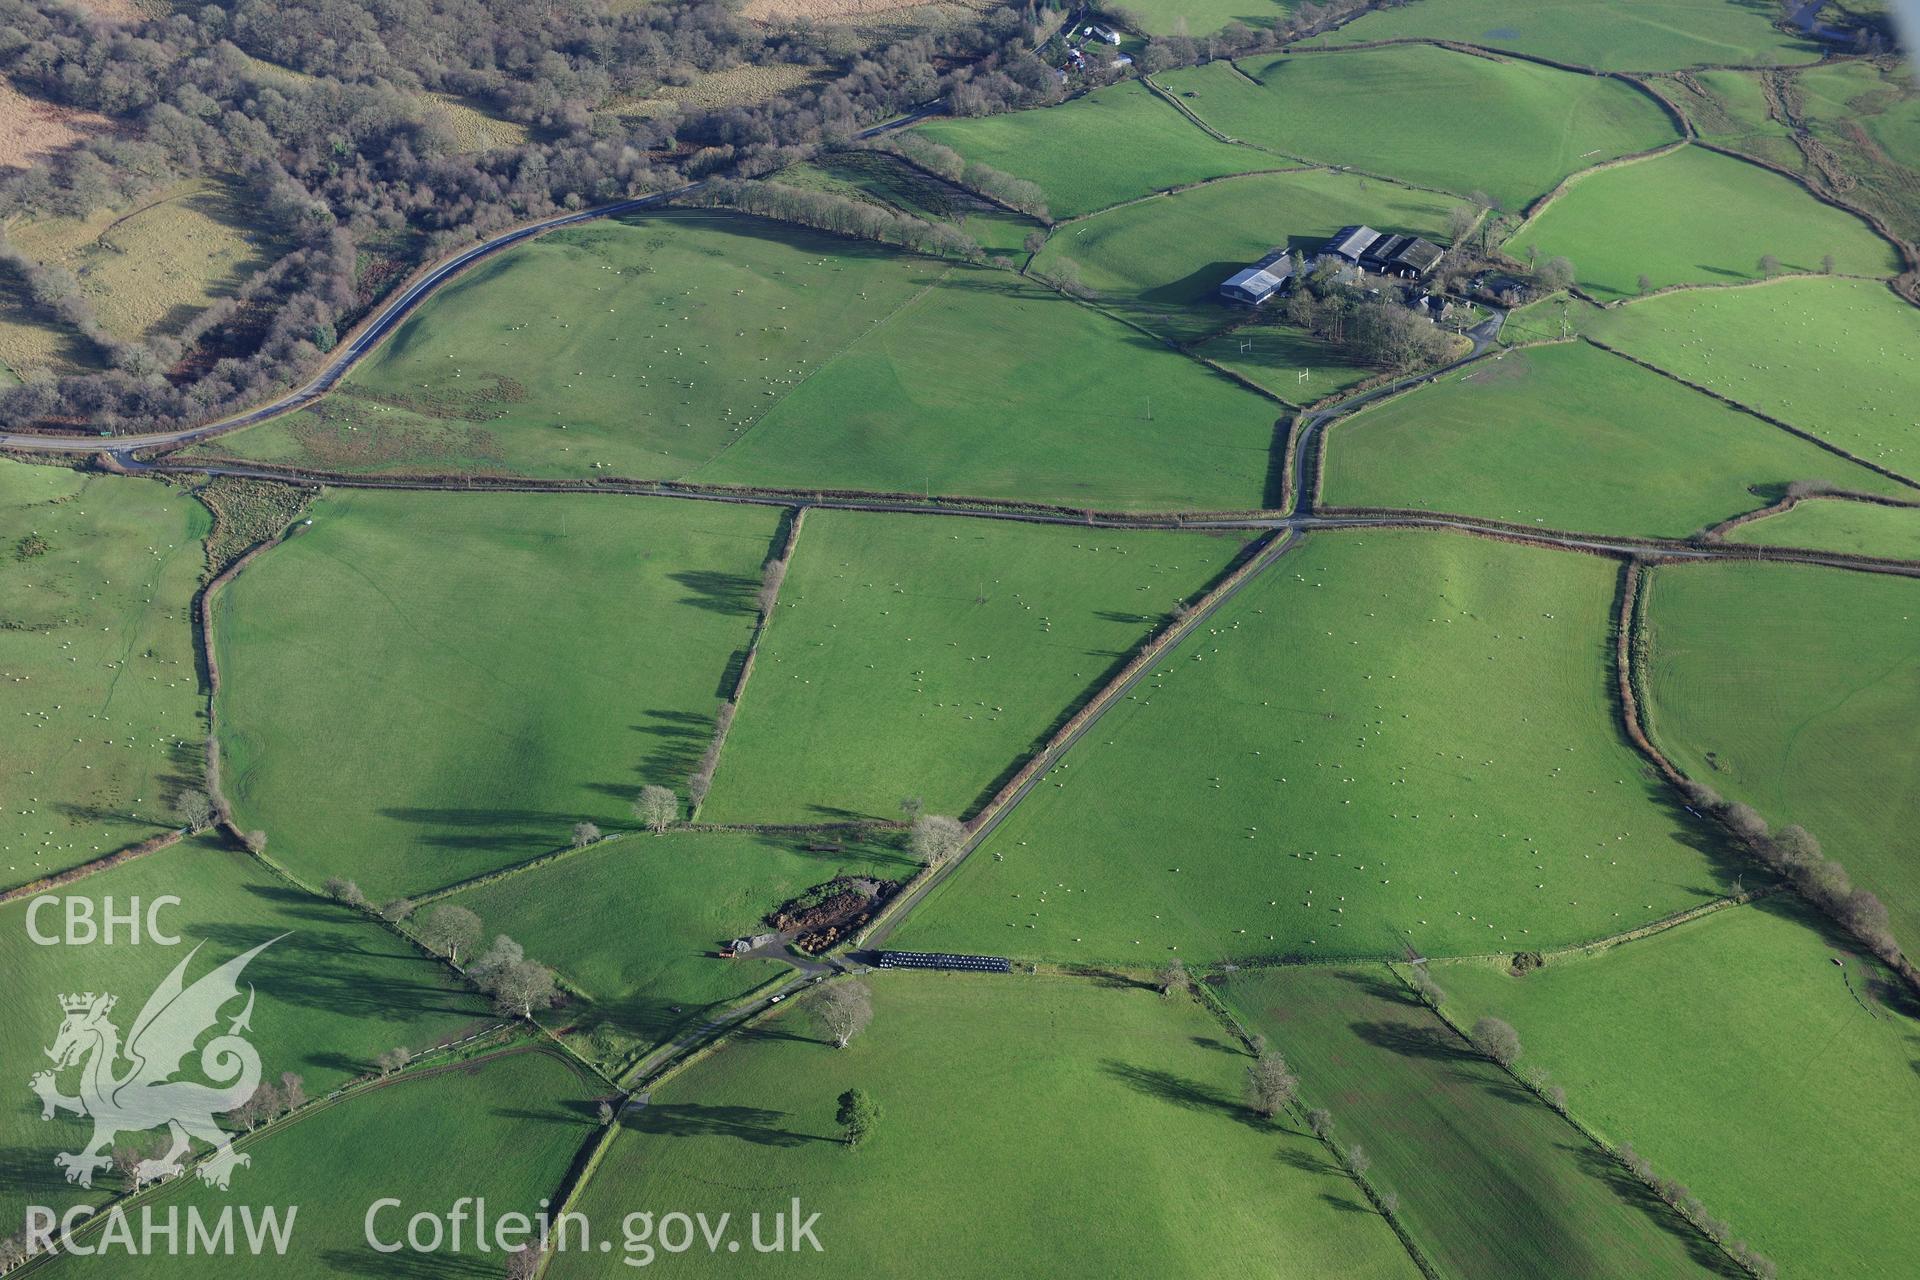 RCAHMW colour oblique photograph of Roman camp west of Caerau Roman fort, view of location of cropmark site from the west. Taken by Toby Driver on 23/11/2012.